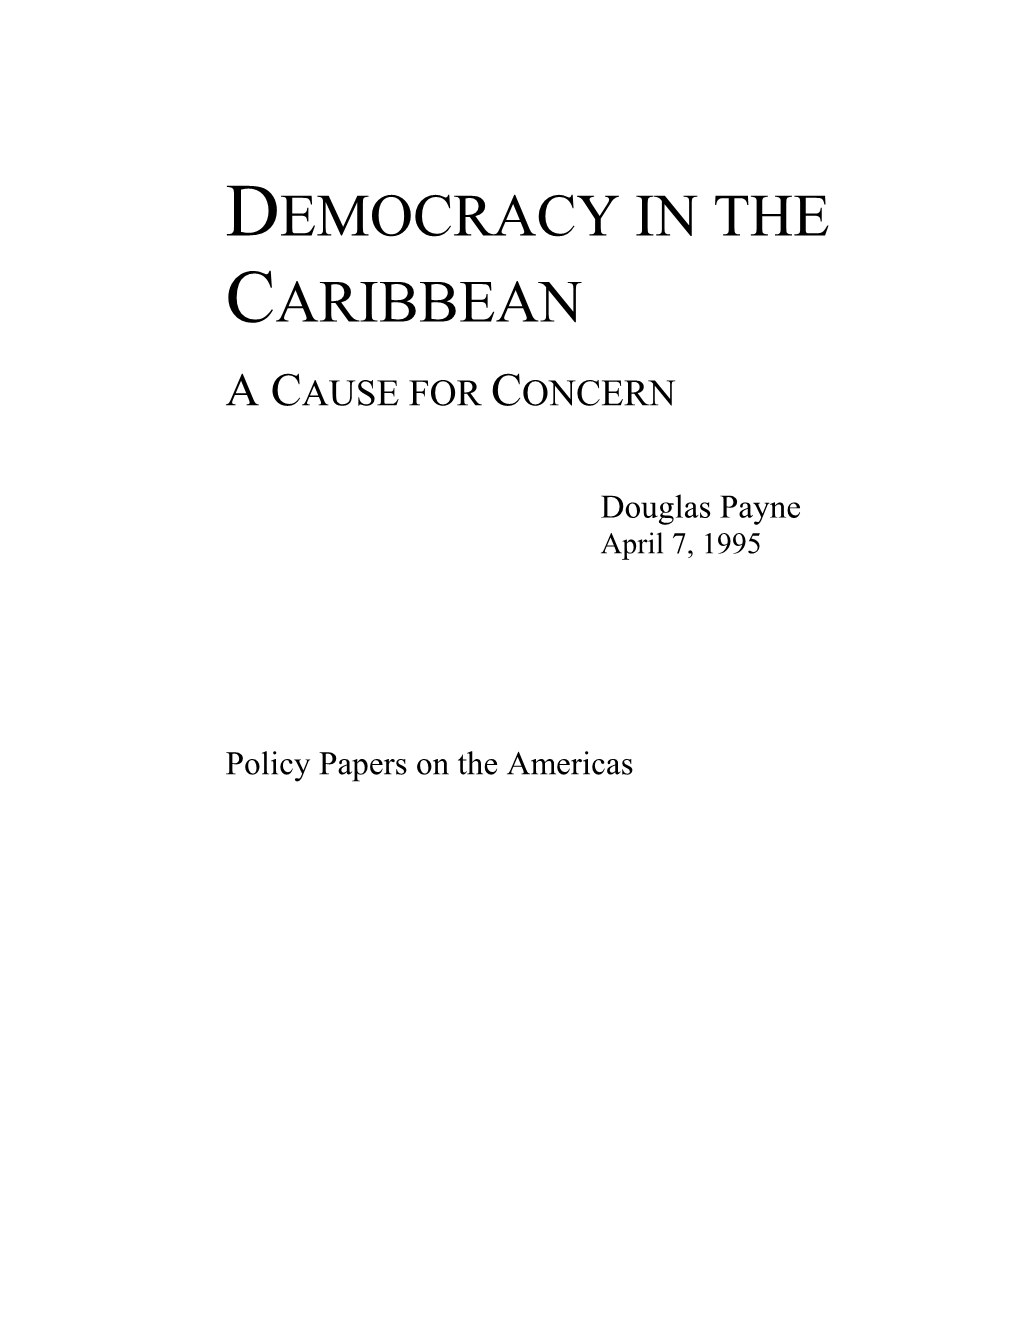 Democracy in the Caribbean a Cause for Concern